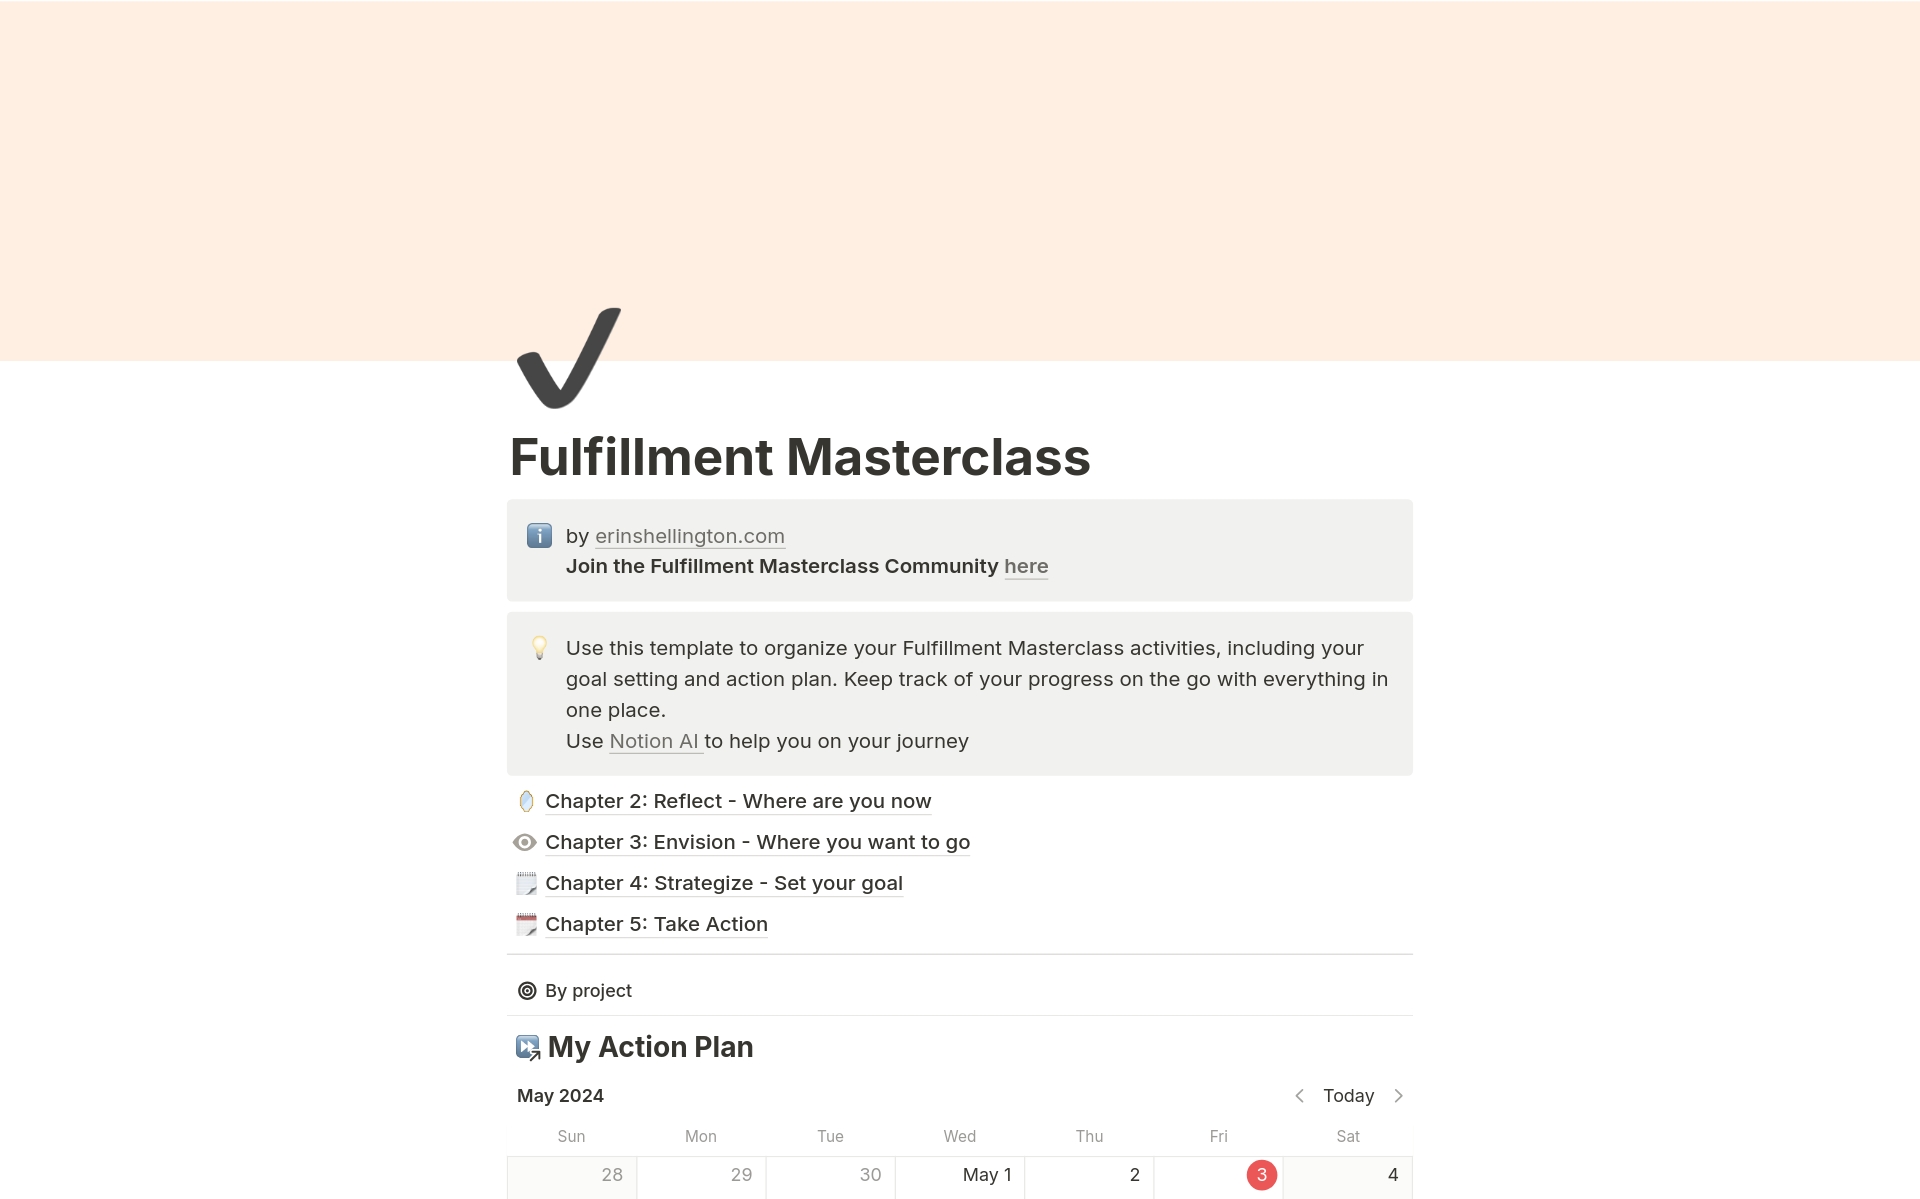 Introducing the Fulfillment Masterclass.
This isn't just another course; it's a transformative journey. This course that combines academic rigour and real-life insights to create a unique, evidence-based approach tailored to get you from feeling stuck to taking action in 90 days.